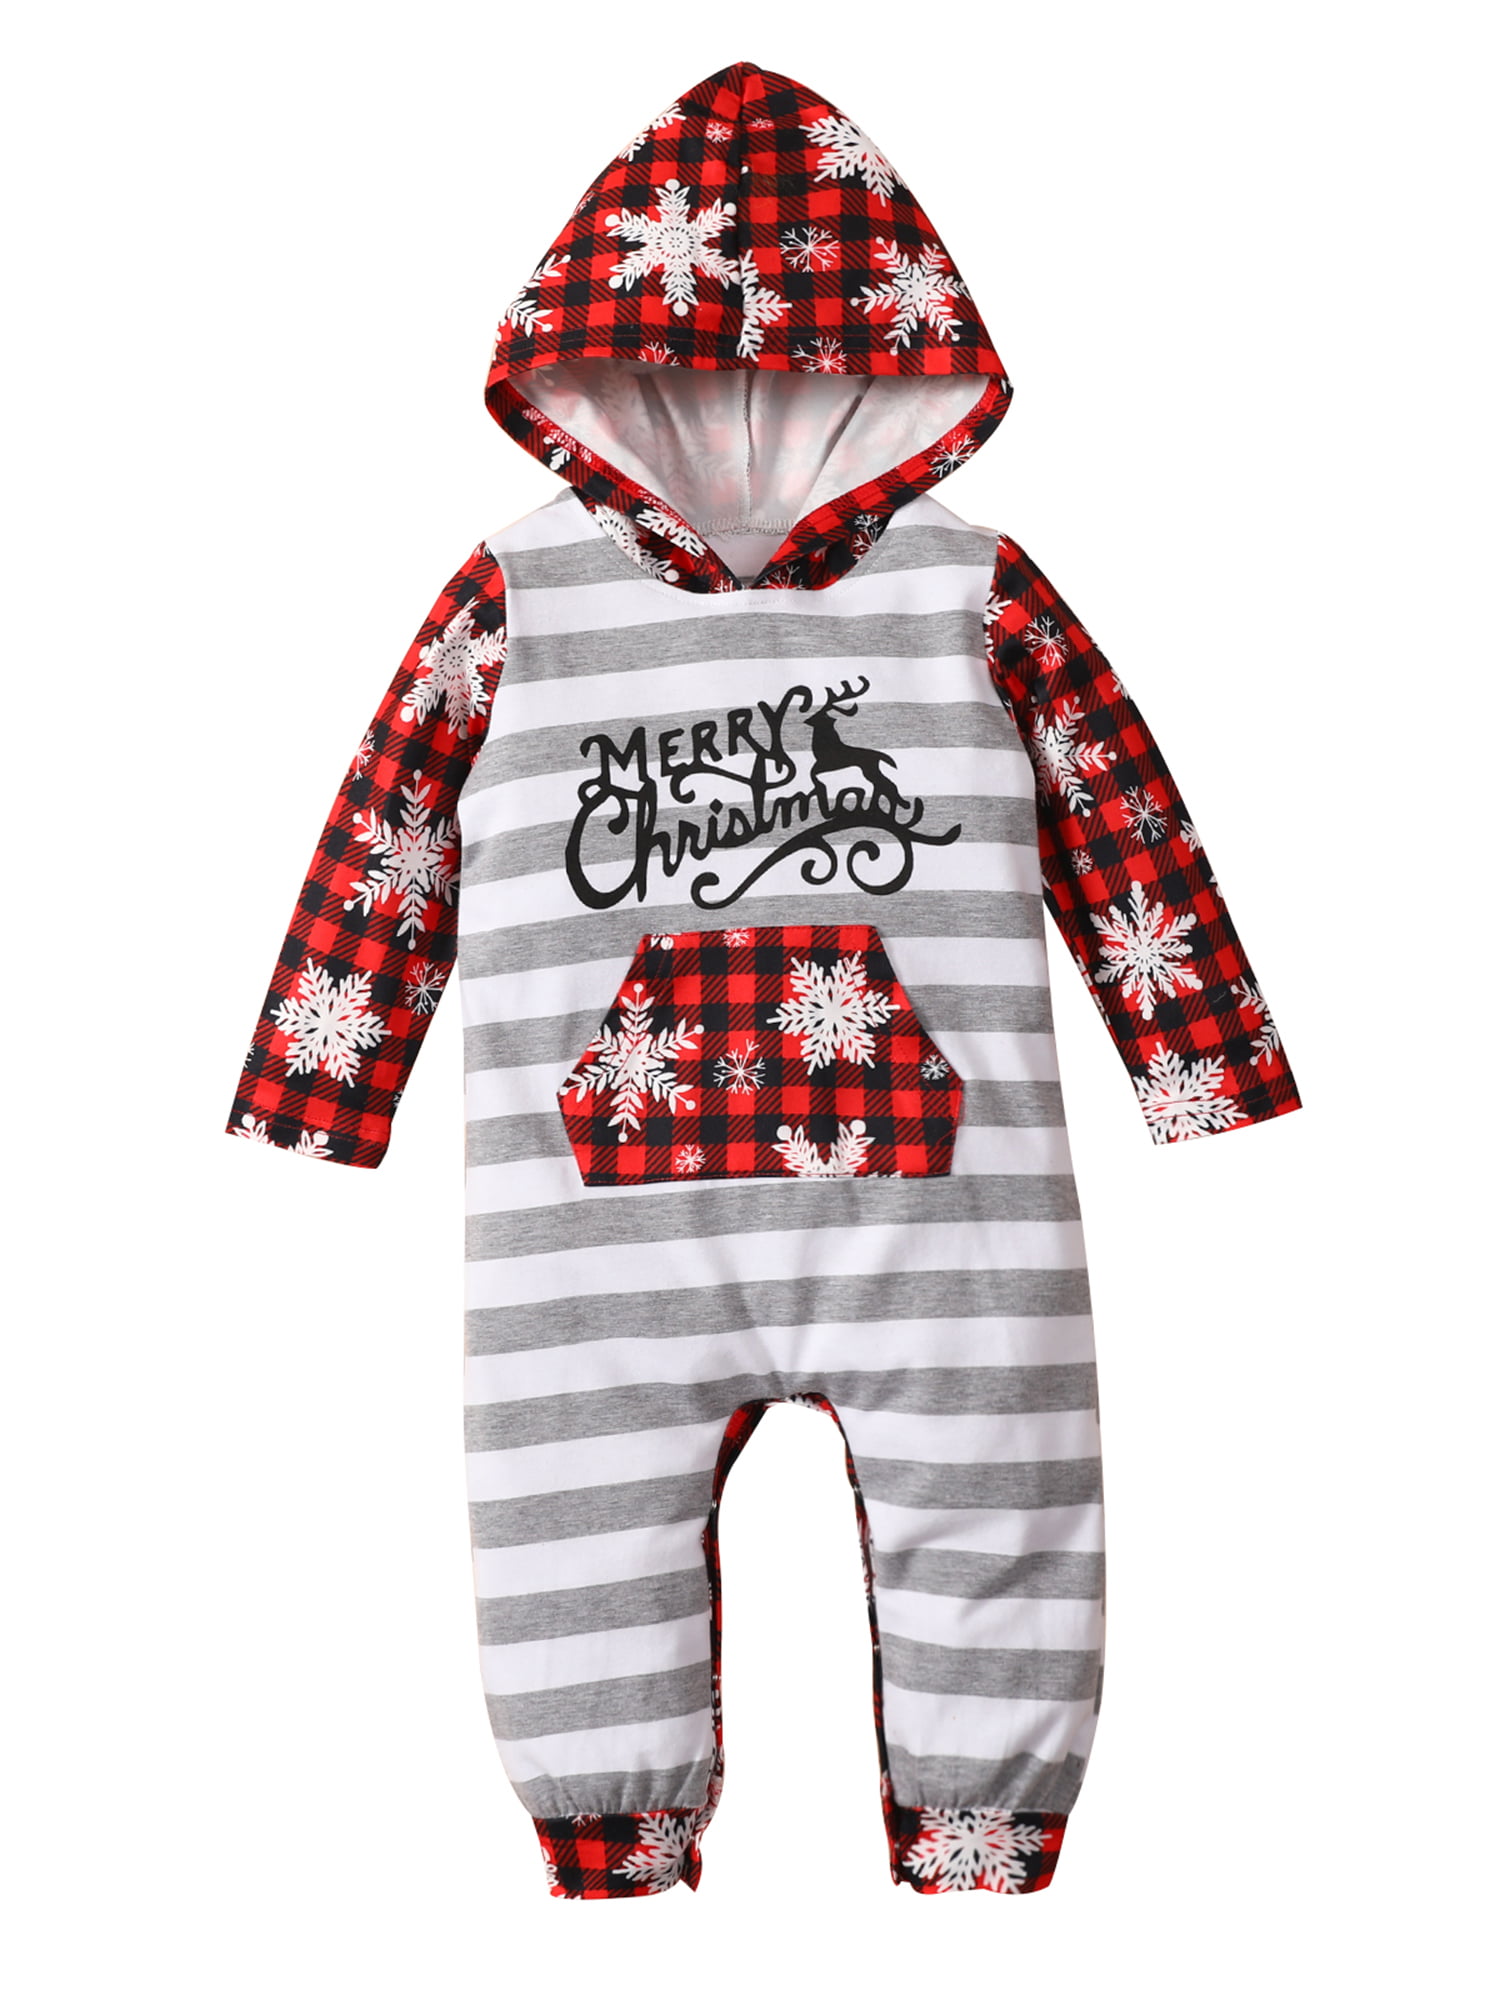 Christmas Outfit Newborn Infant Baby Girl Boy Striped Romper Jumpsuit Colorful 